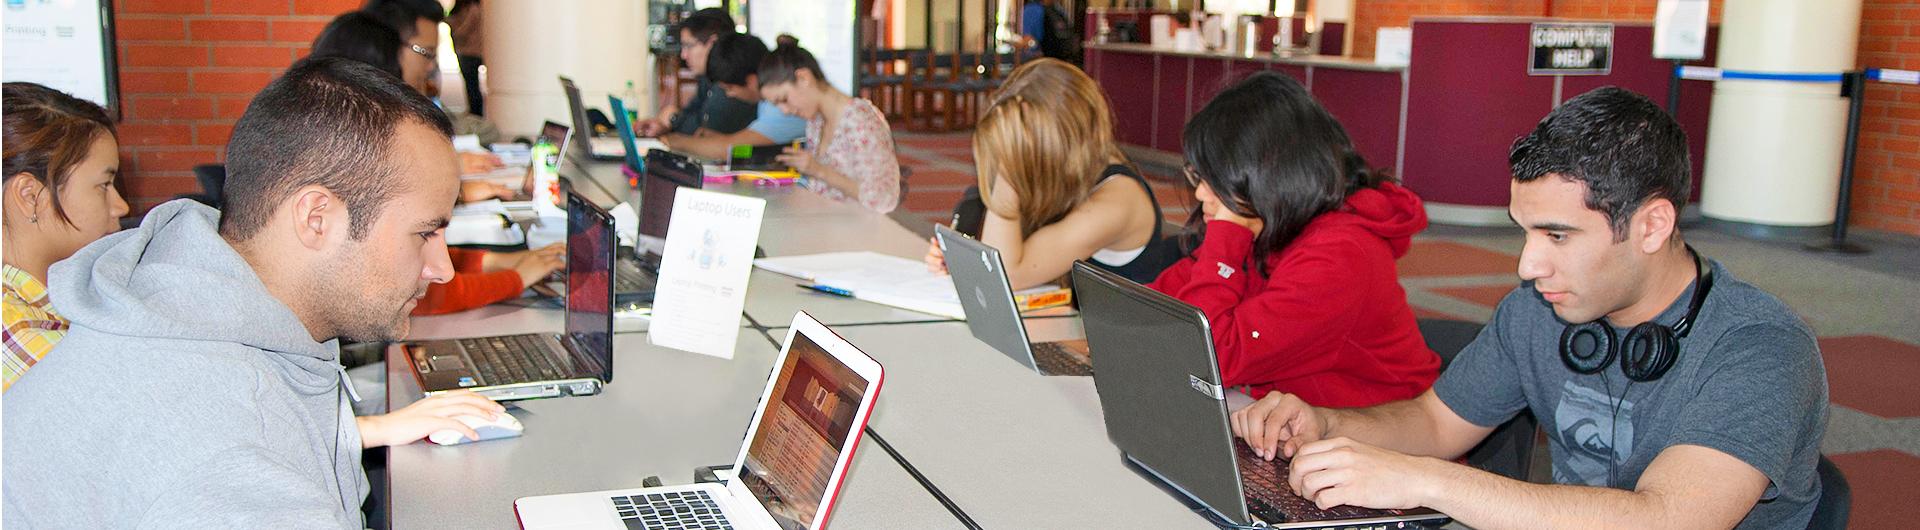 students in computer lap on laptops